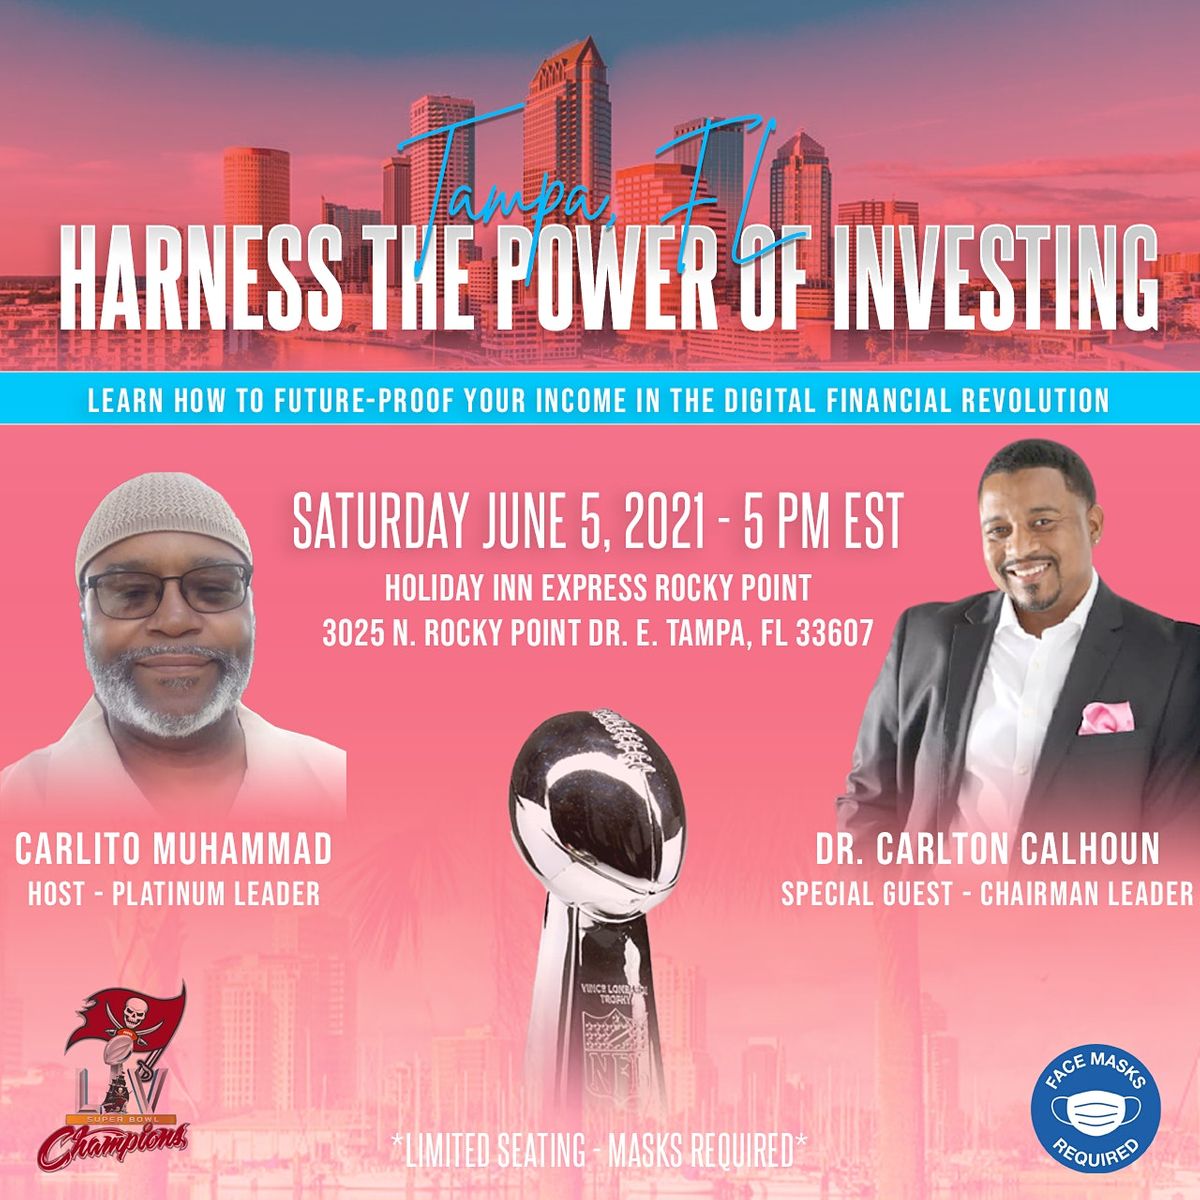 Harness The Power Of Investing Tampa FL Event